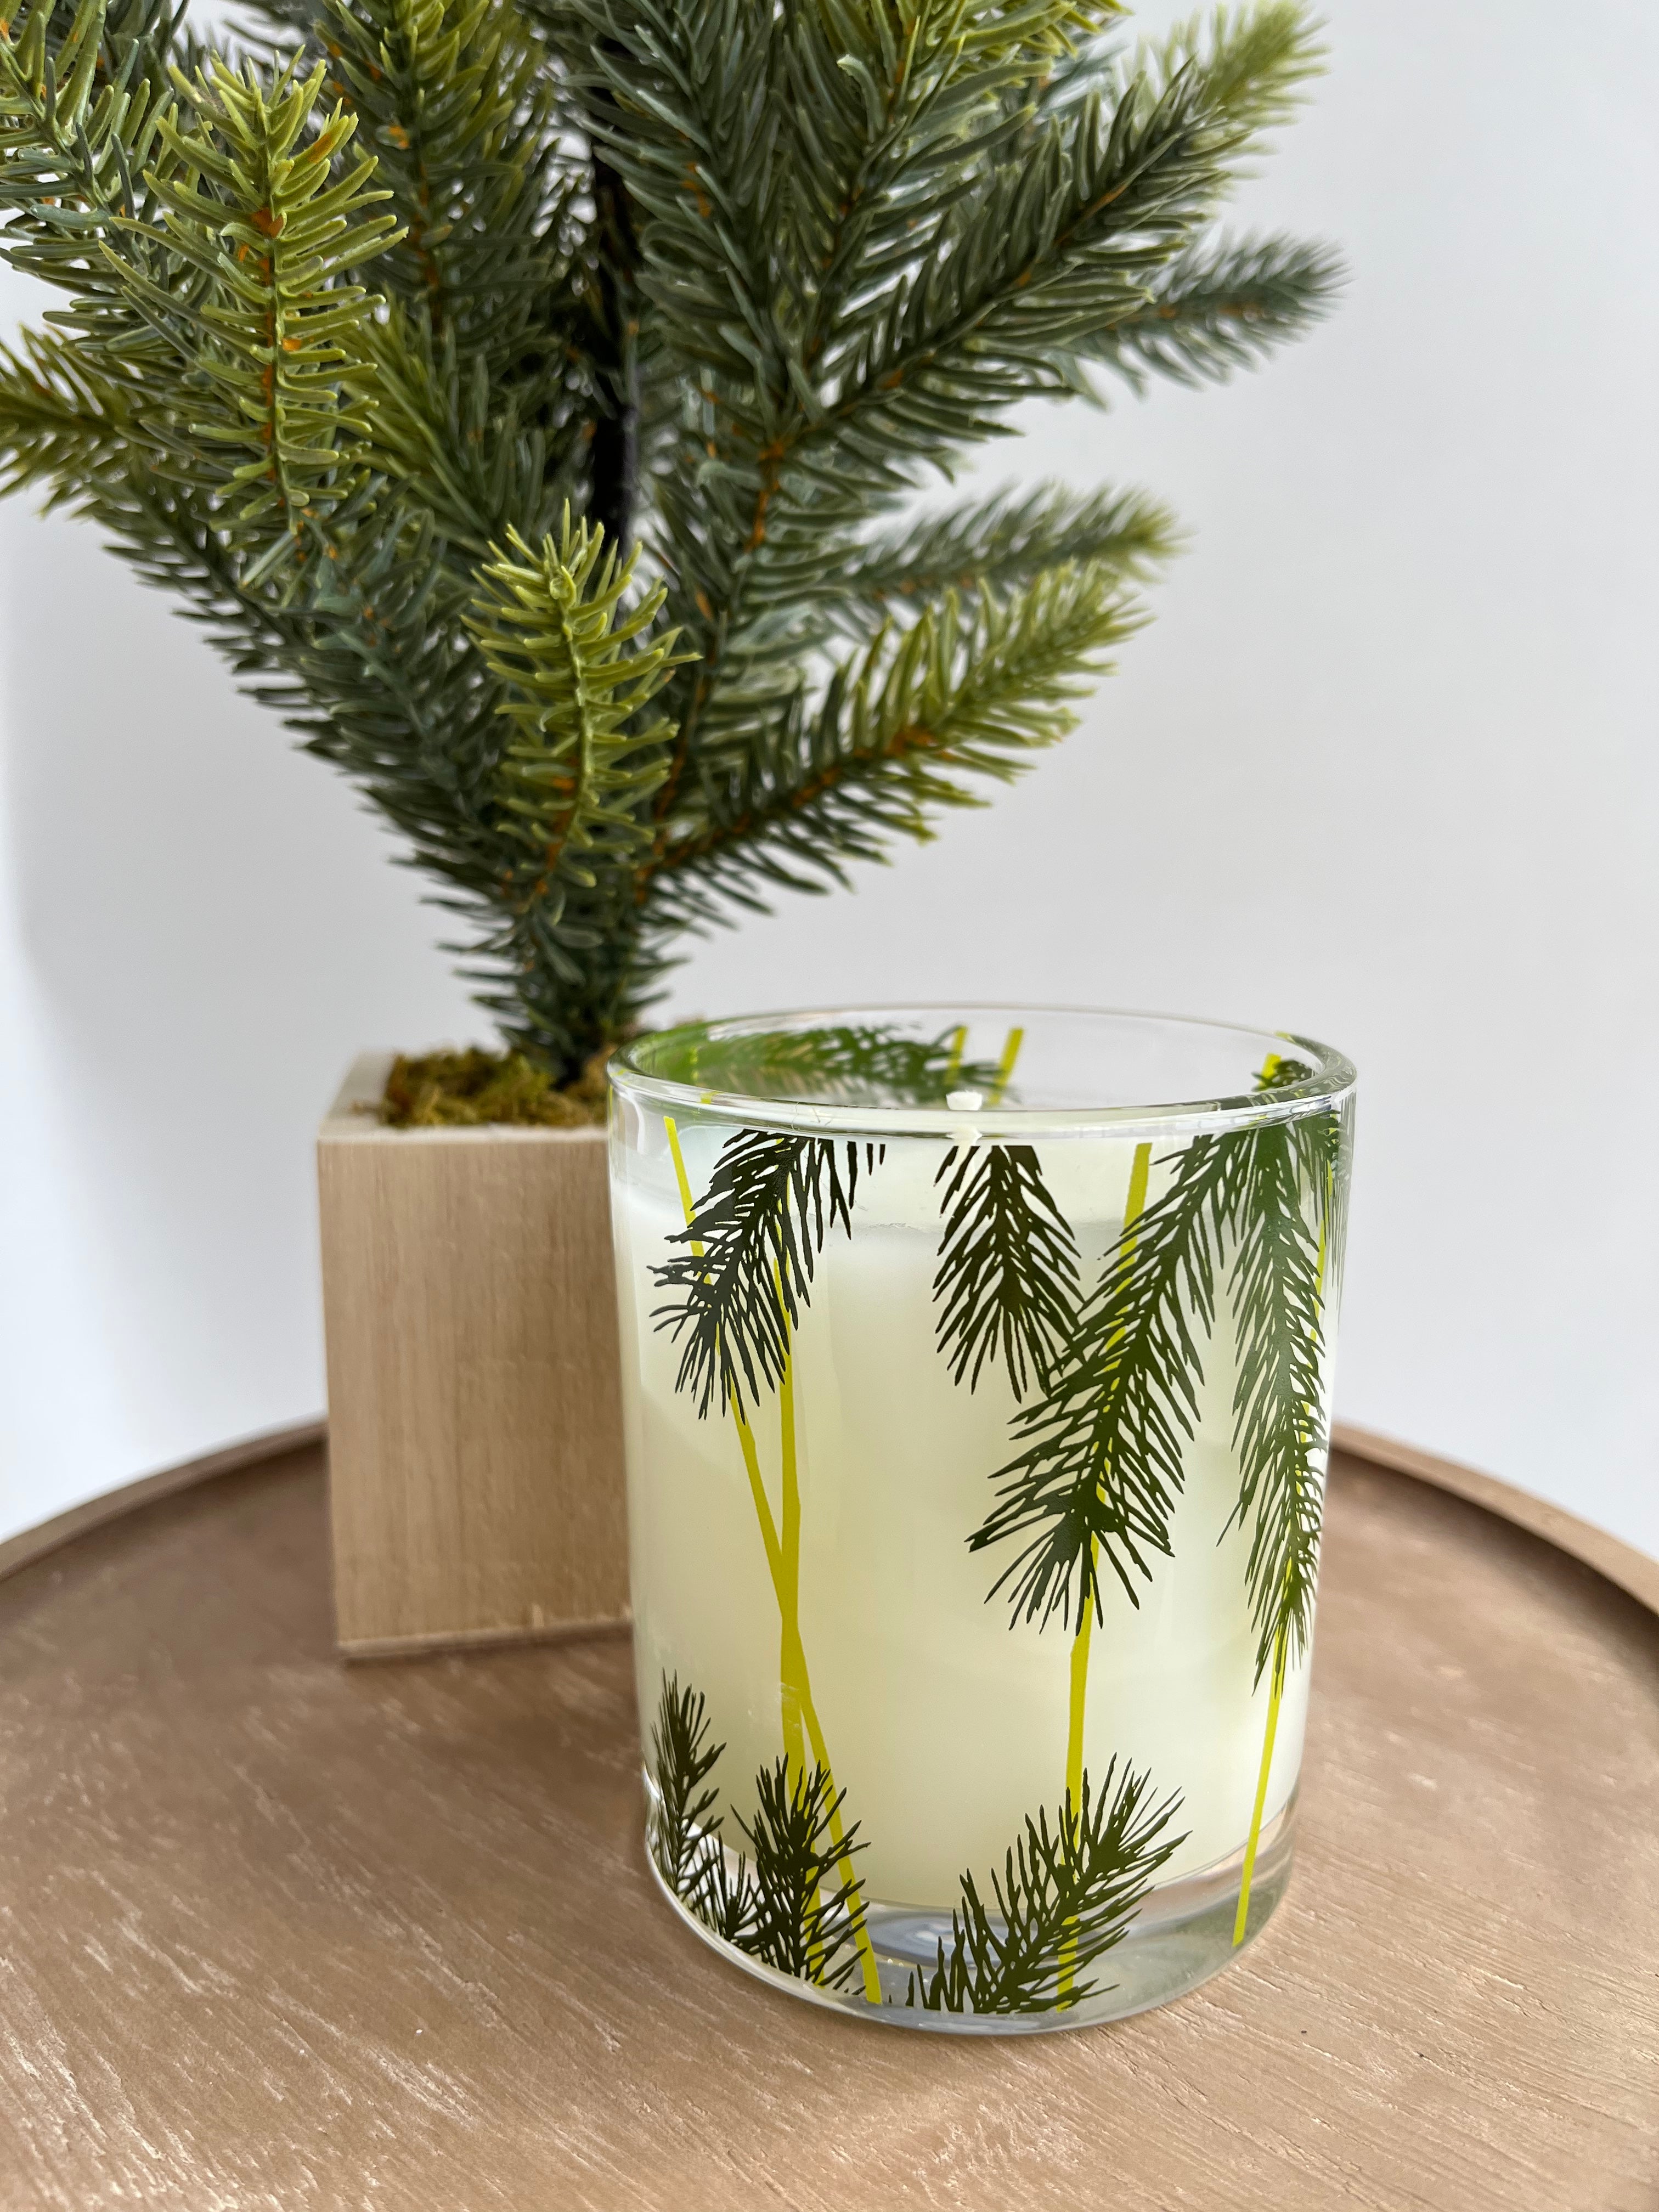 Poured Candle - Frasier Fir Pine Needle design